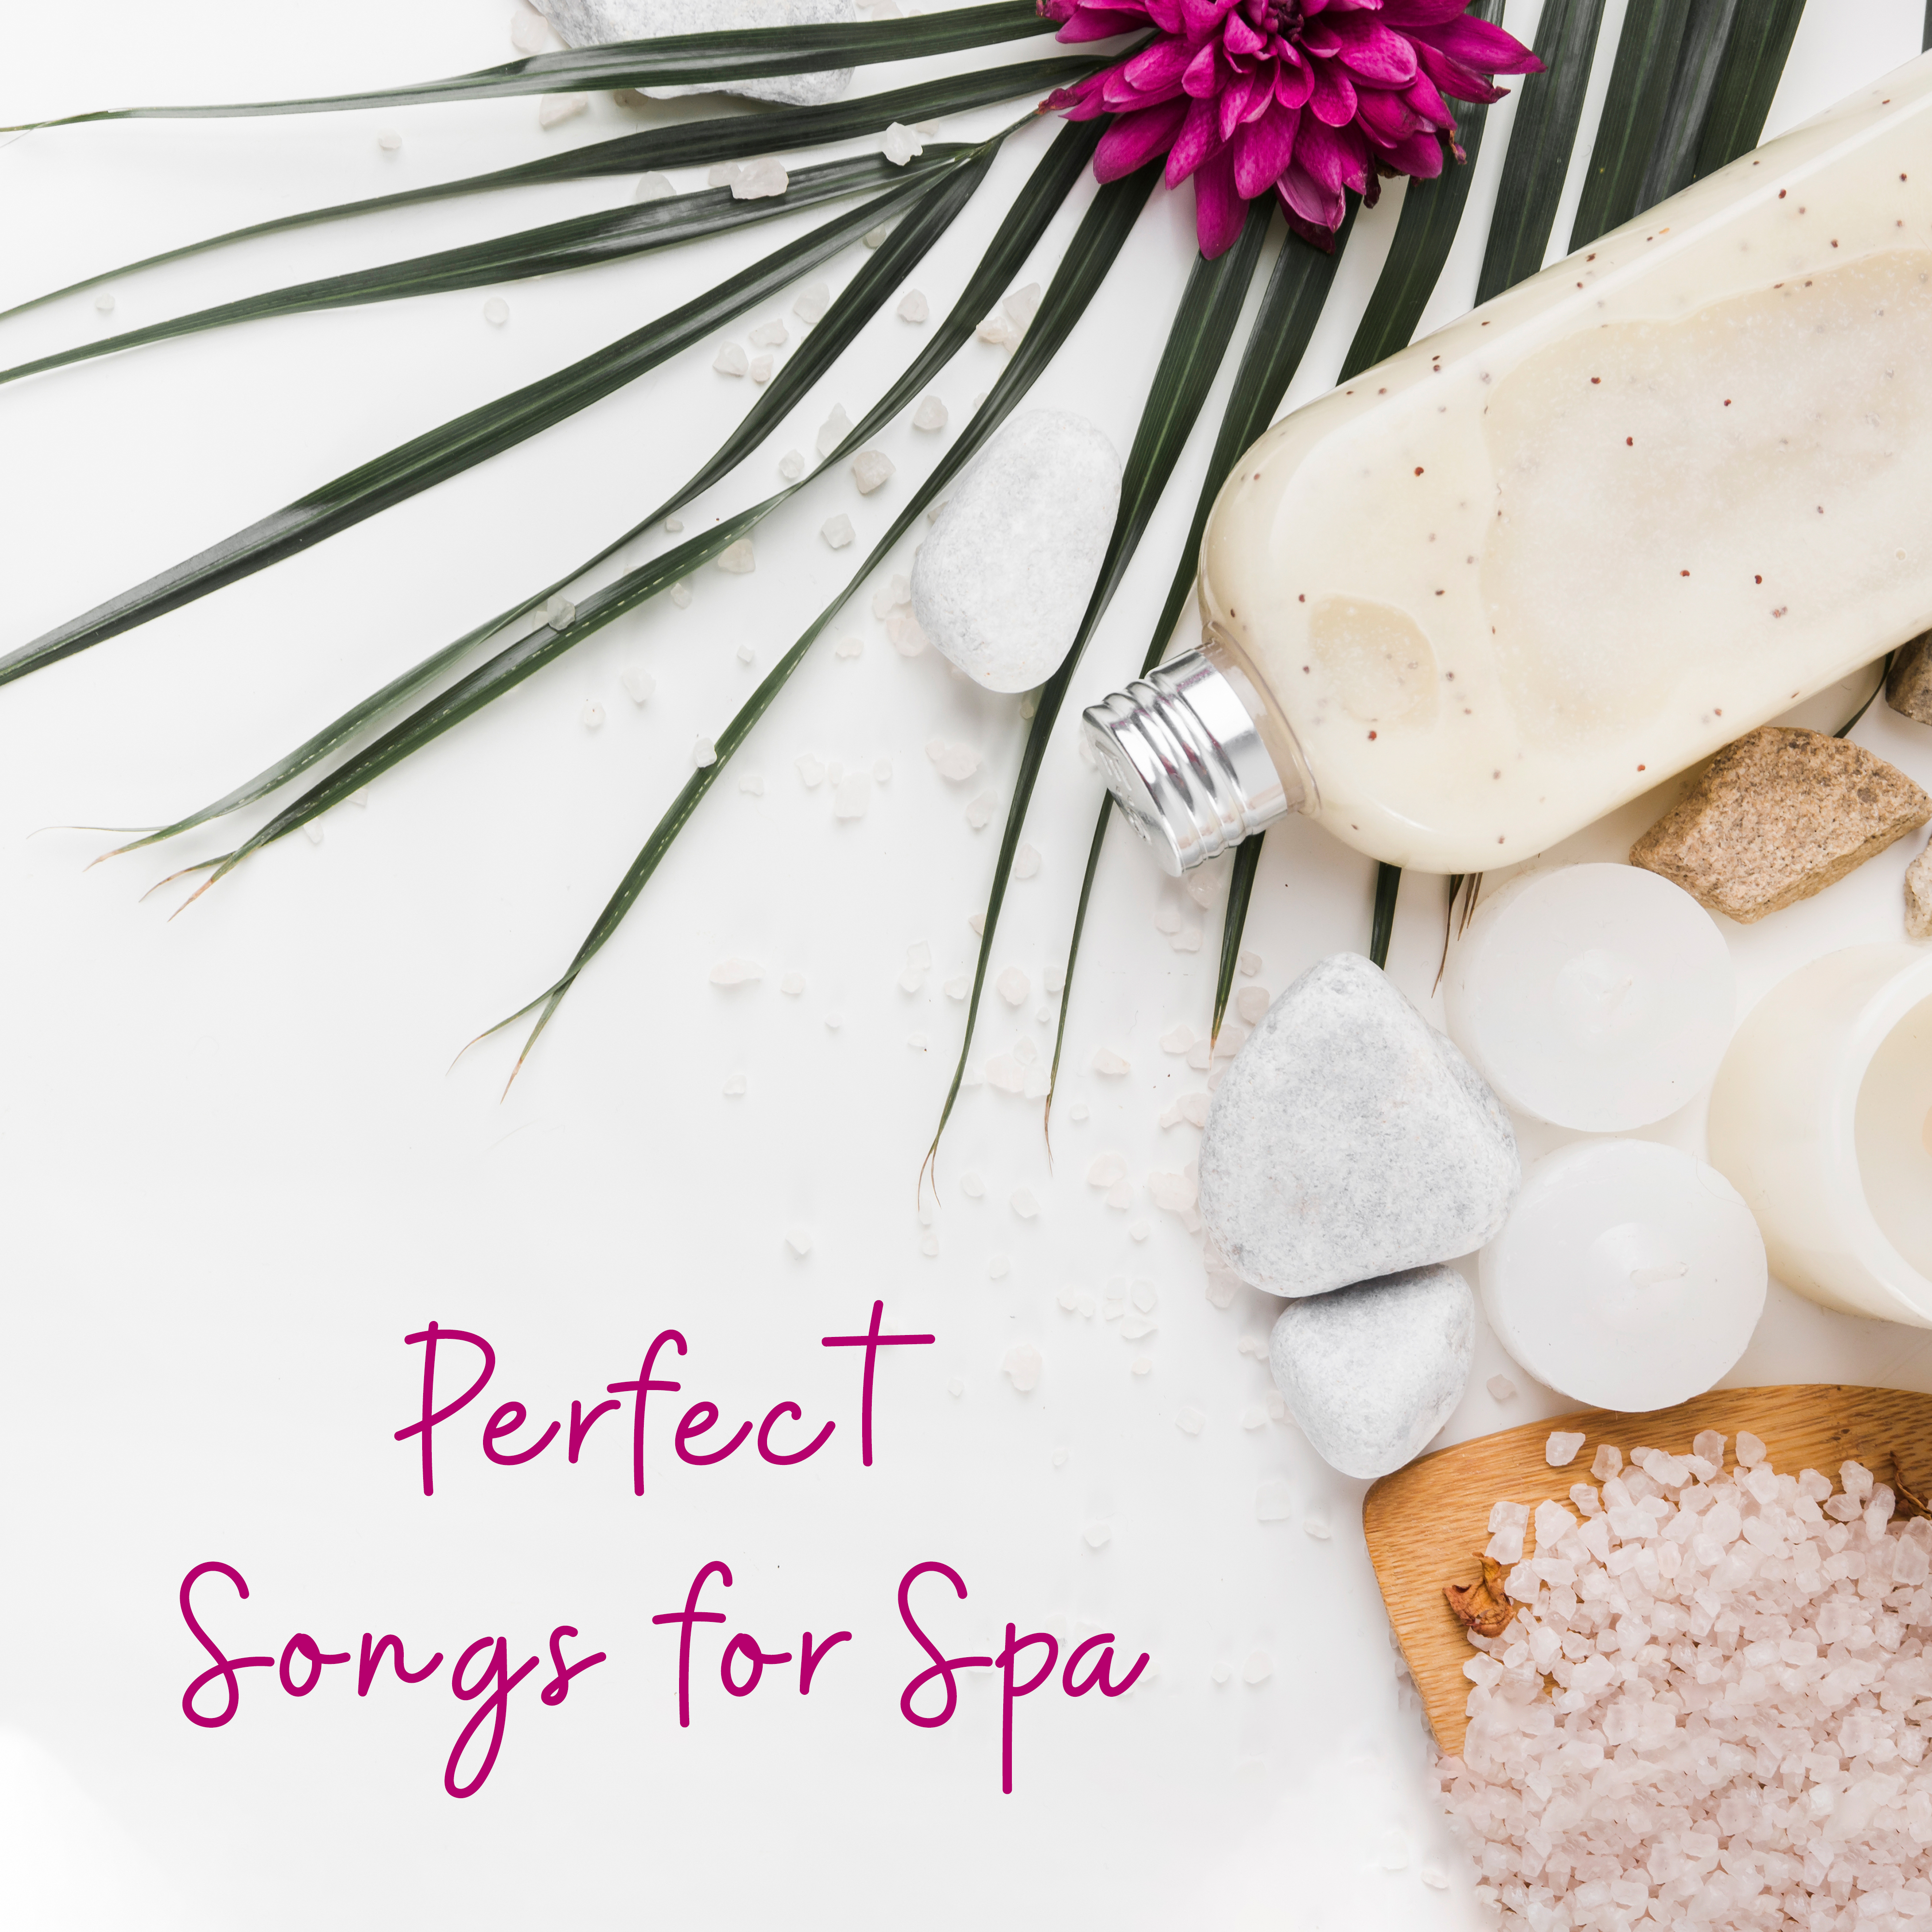 Perfect Songs for Spa